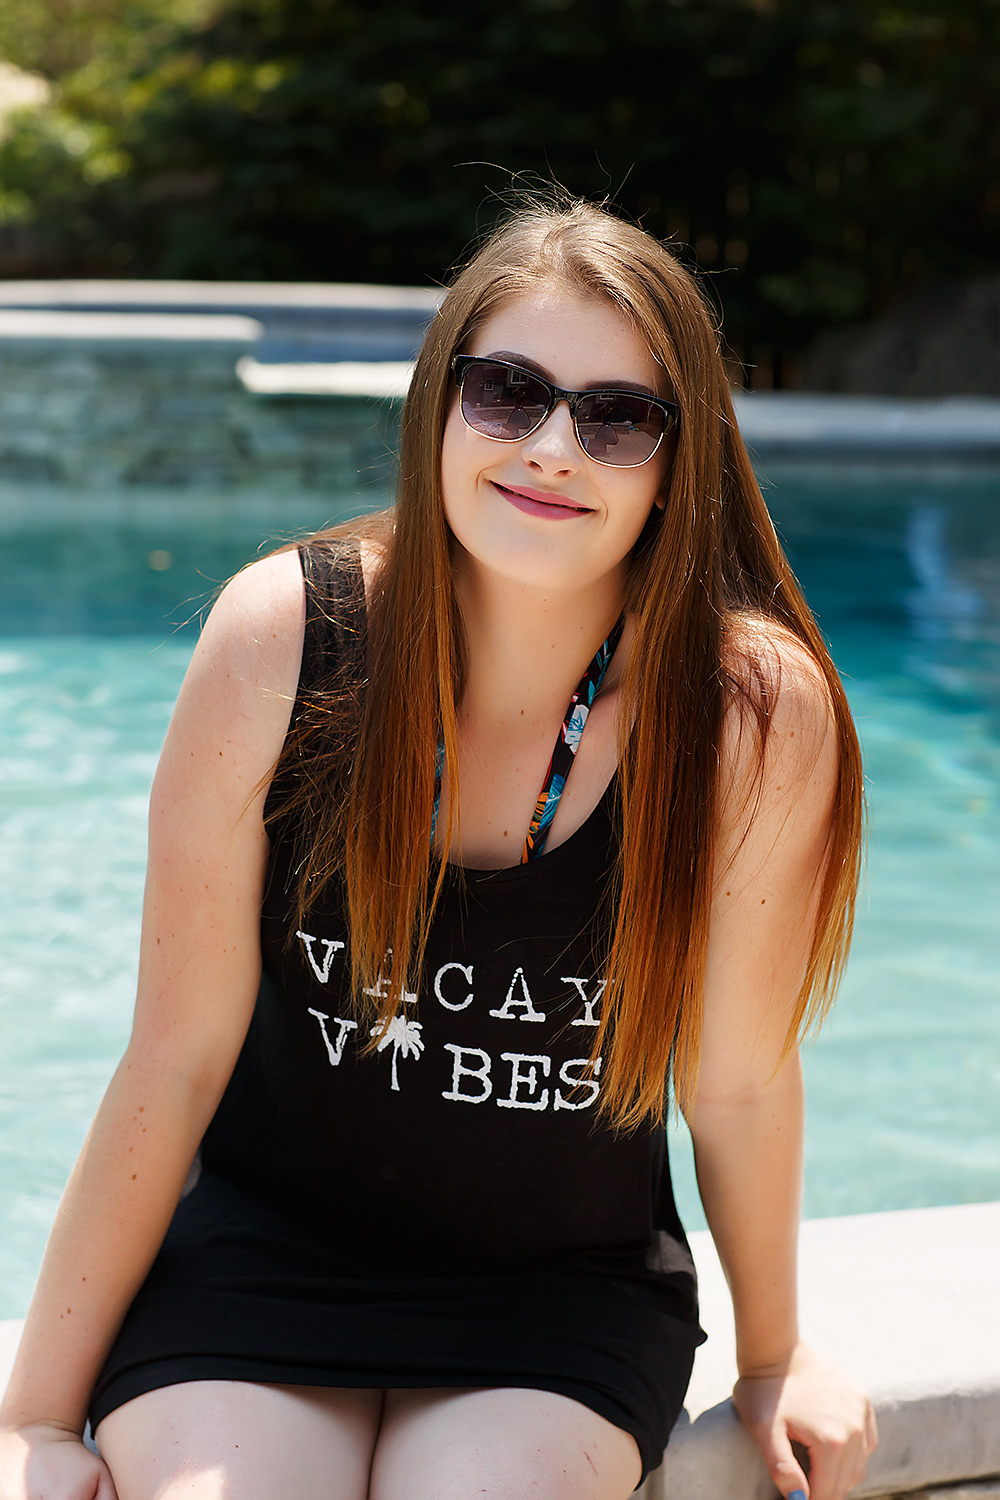 summer pool party senior model pictures by Colleen Sanders Photography in El Dorado Hills.